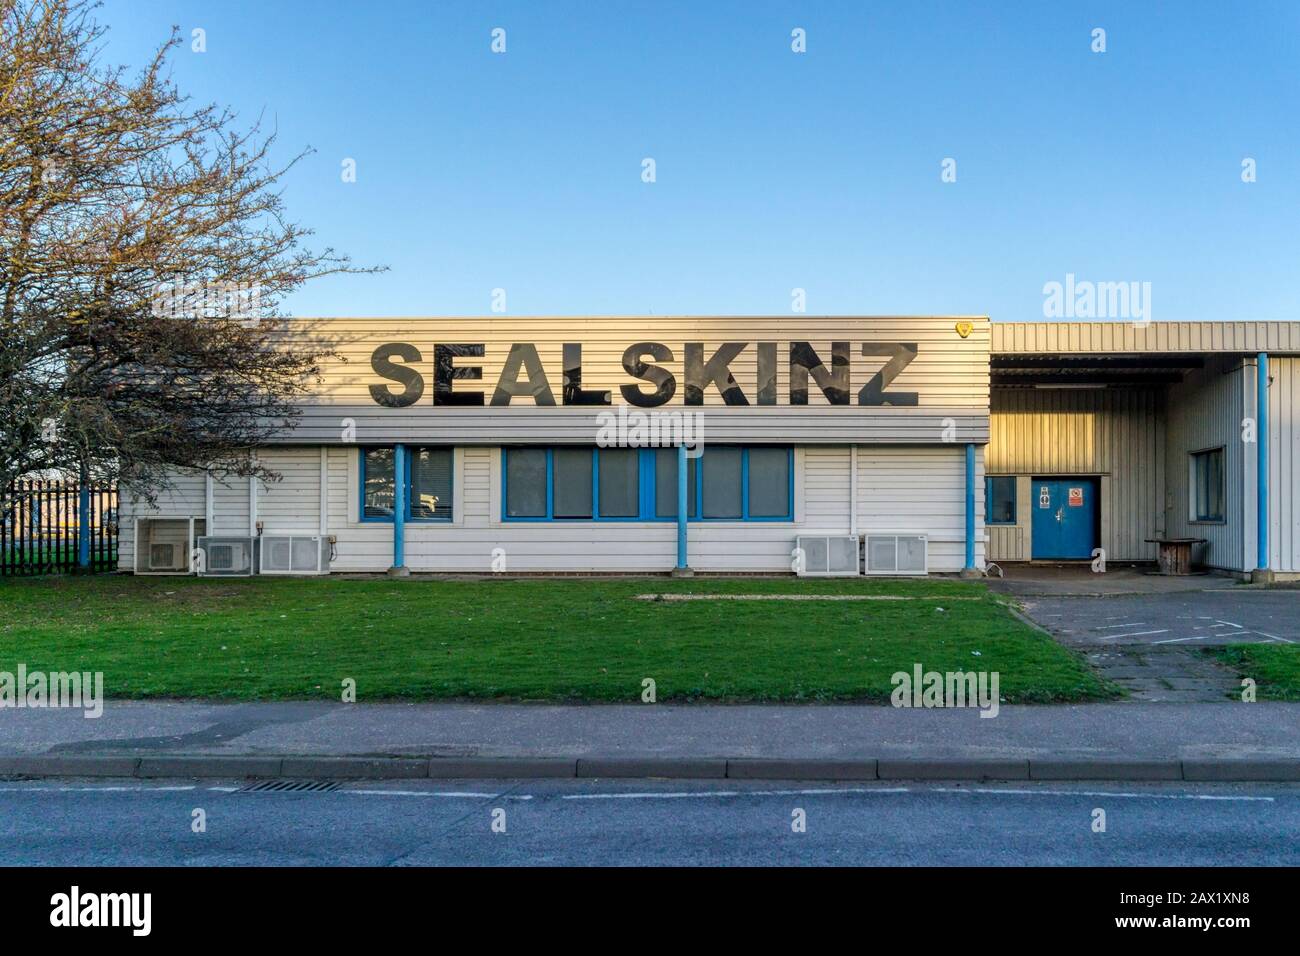 The premises of Sealskinz, makers of waterproof clothing & accessories in King's Lynn, Norfolk. Stock Photo